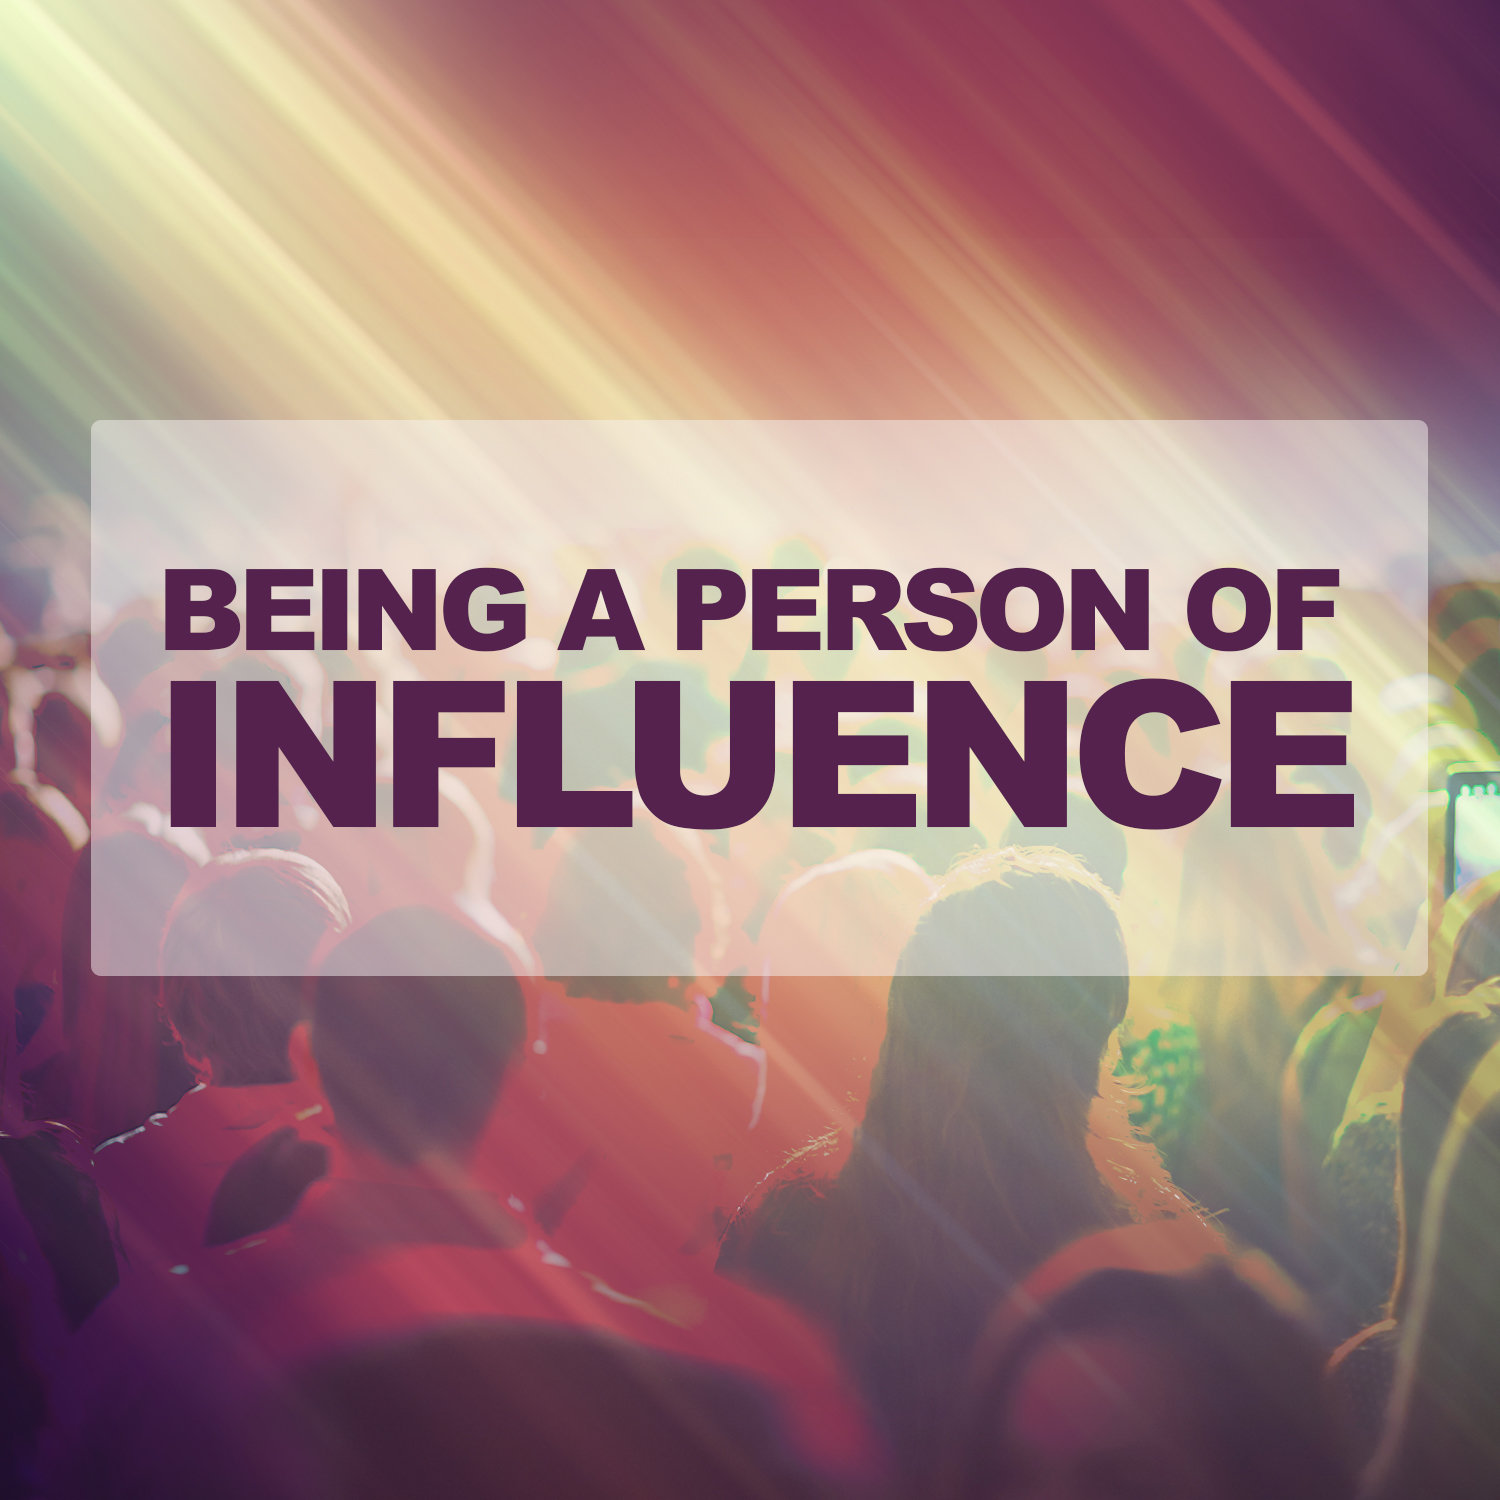 Being A Person of Influence-CD Series